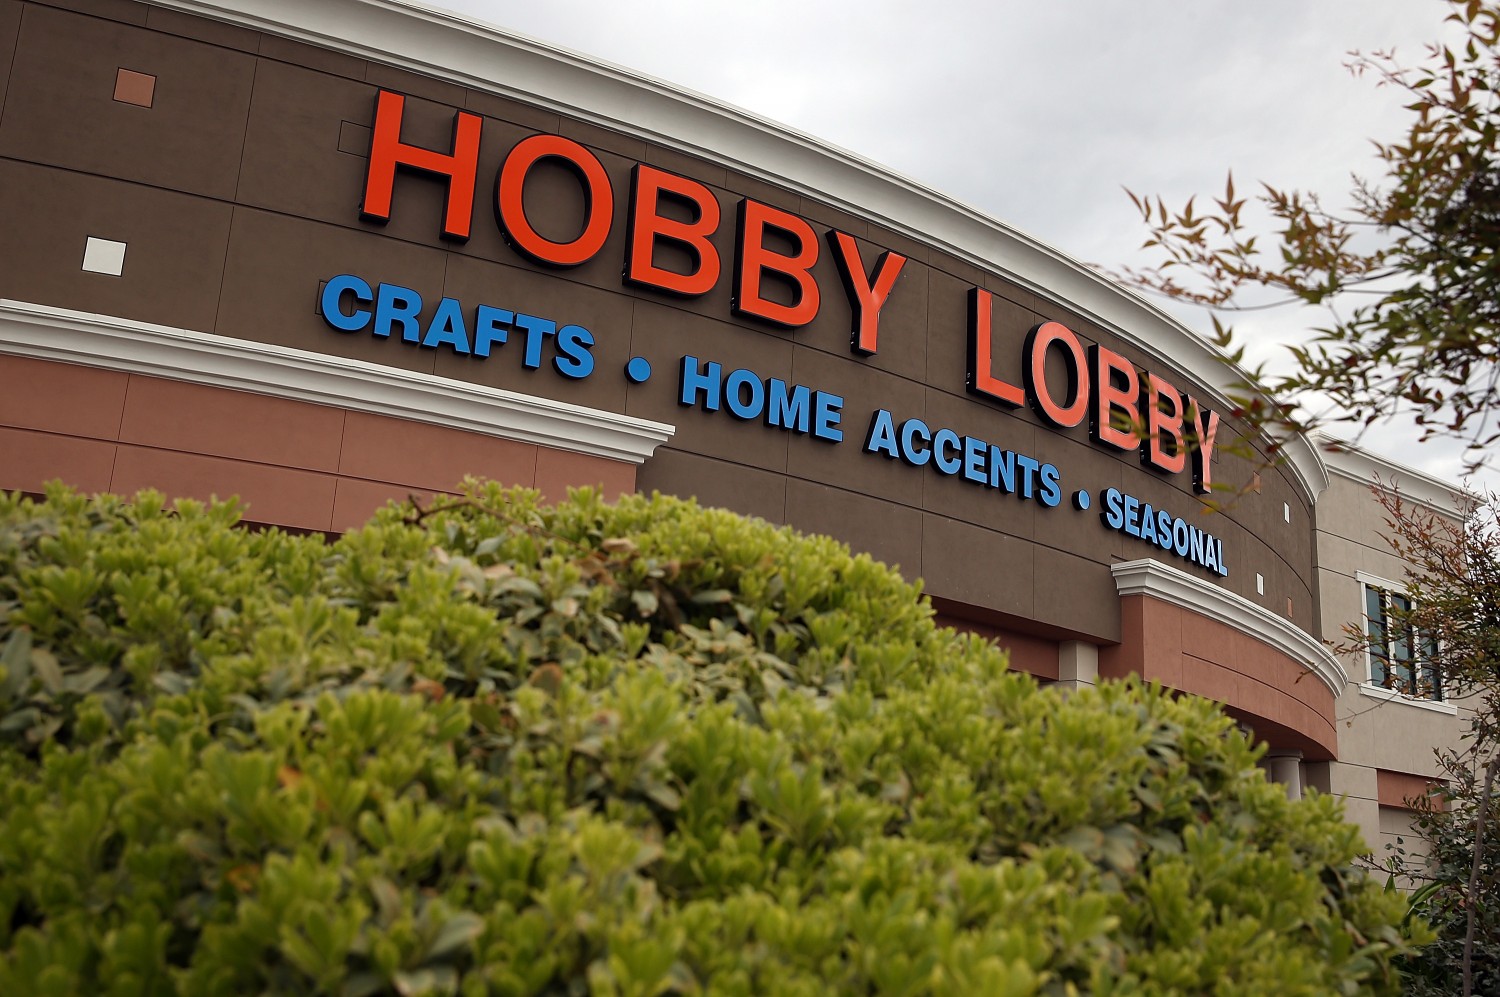 Hobby Lobby At Center Of Supreme Court Case Against Affordable Care Act Birth Control Clause